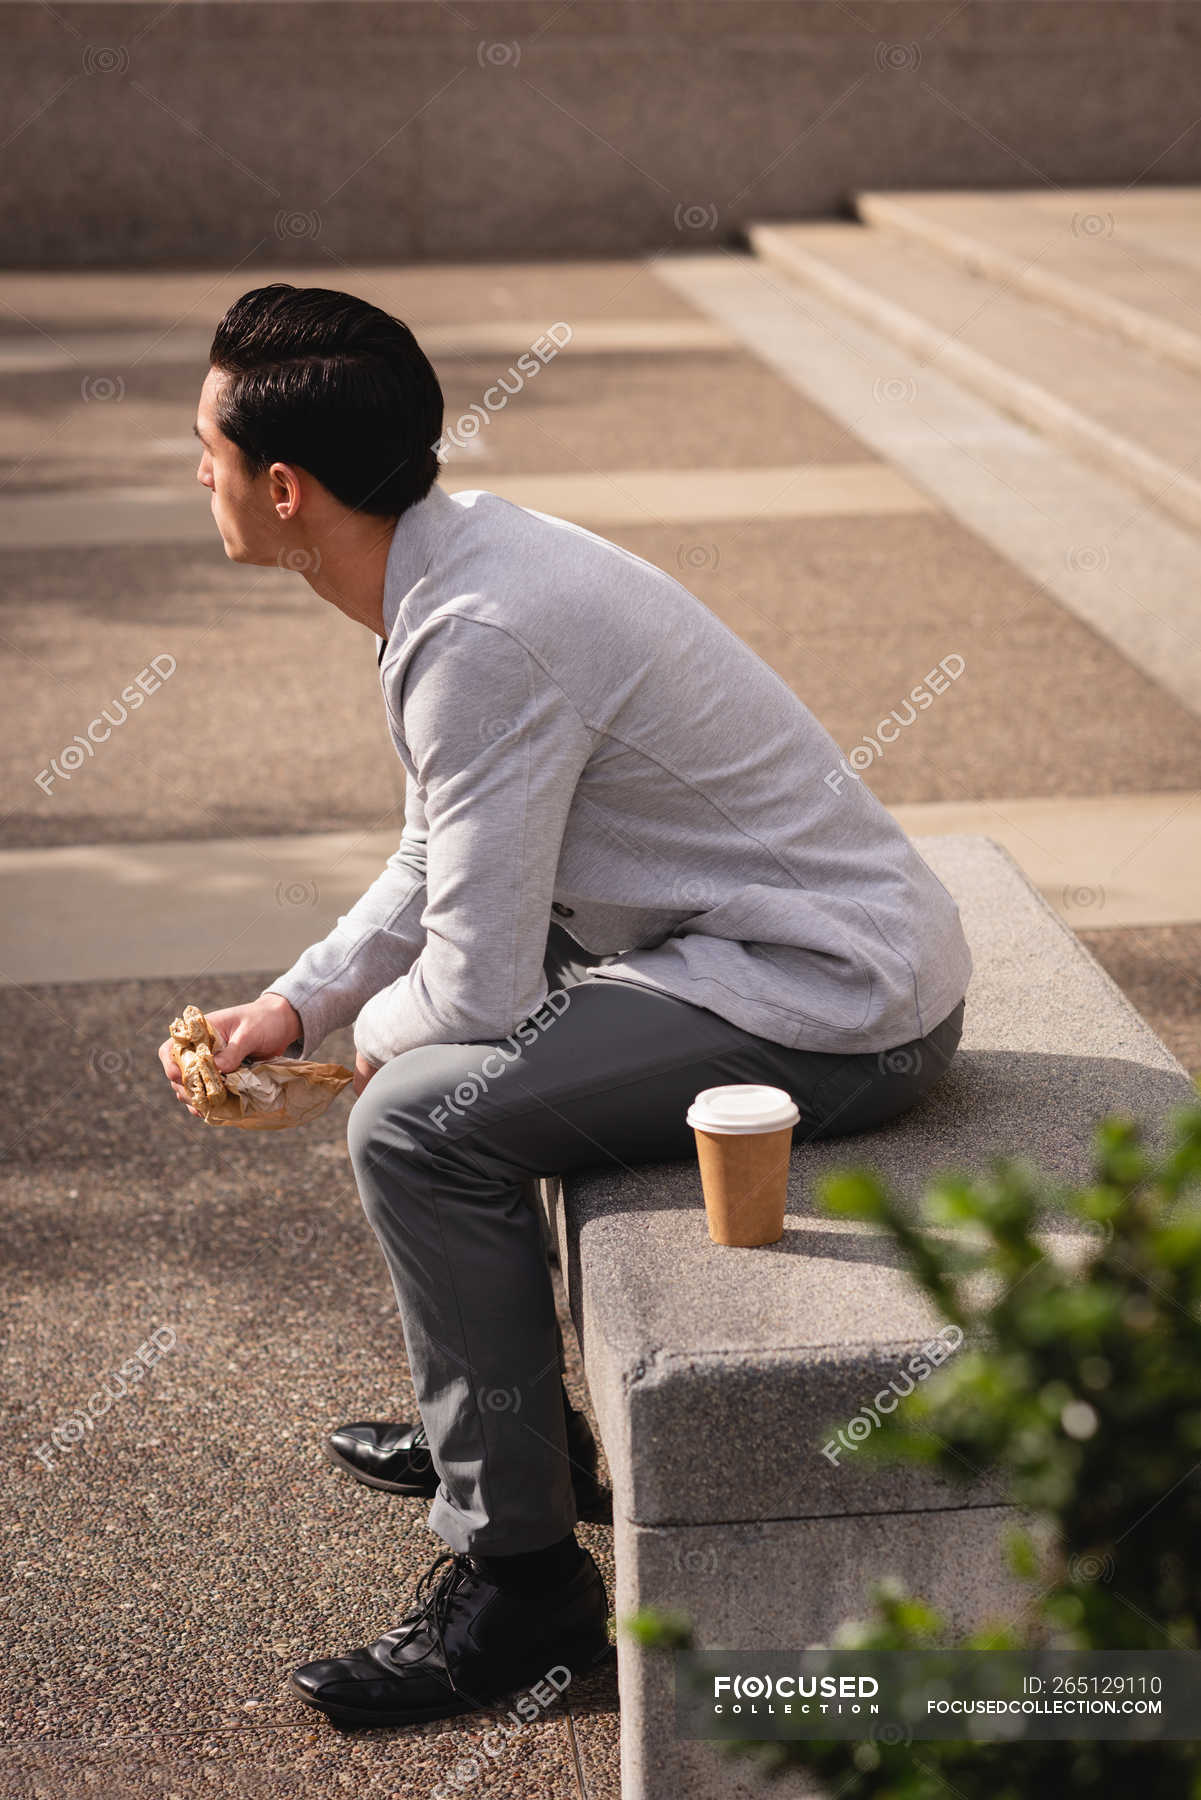 person sitting on bench side view